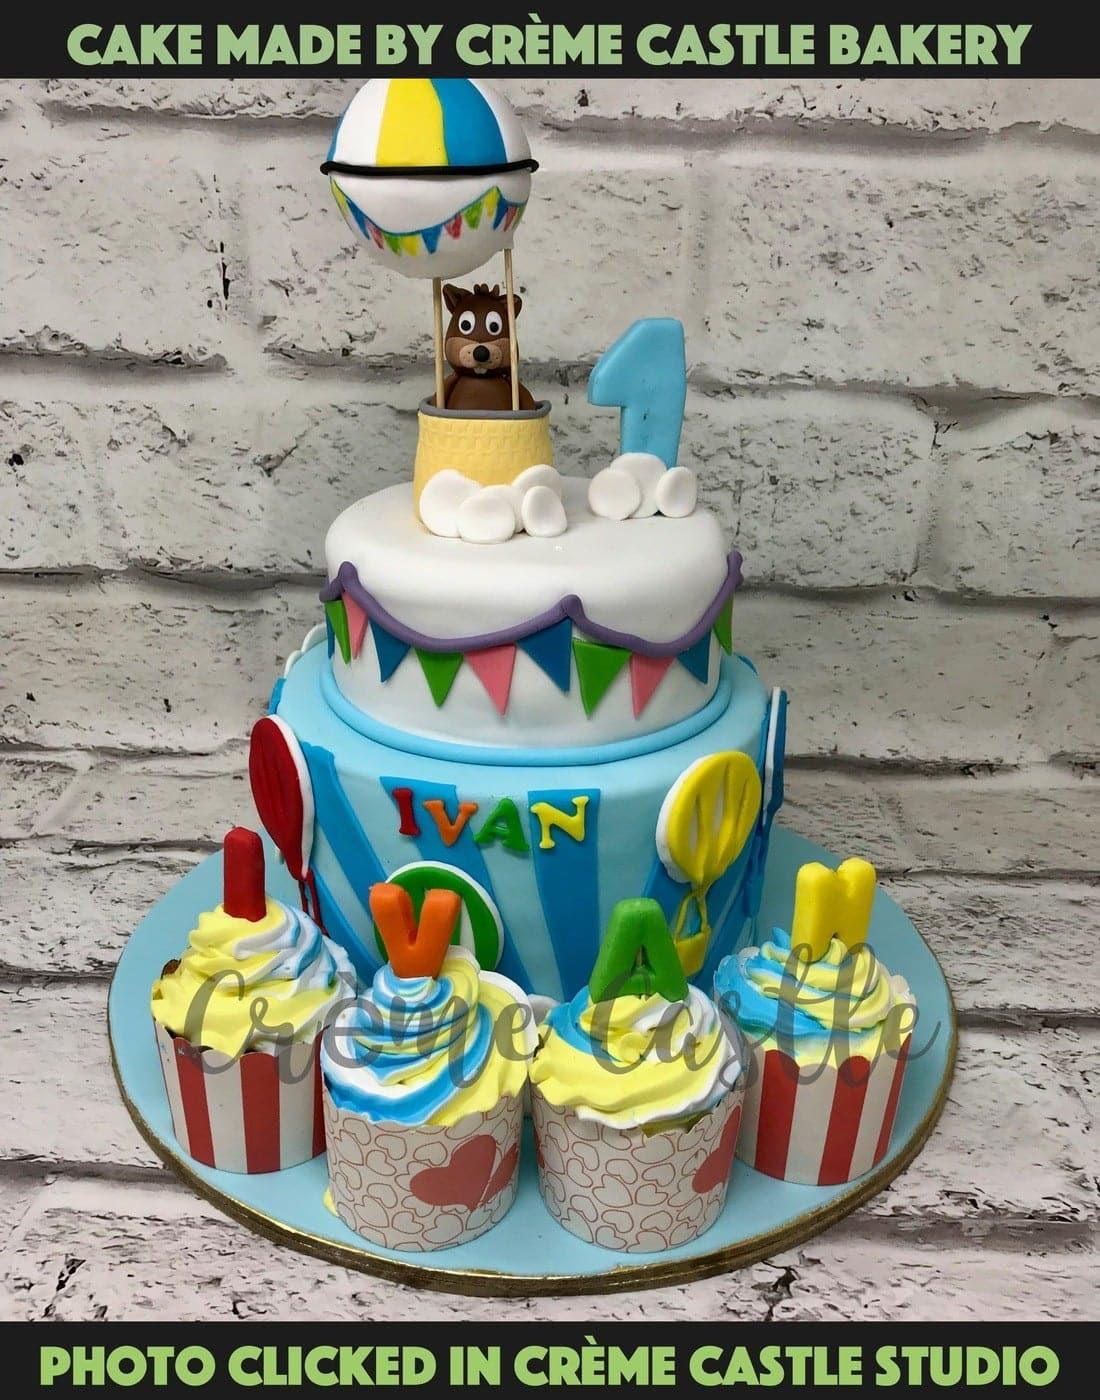 Dogs and Balloons Design Cake - Creme Castle